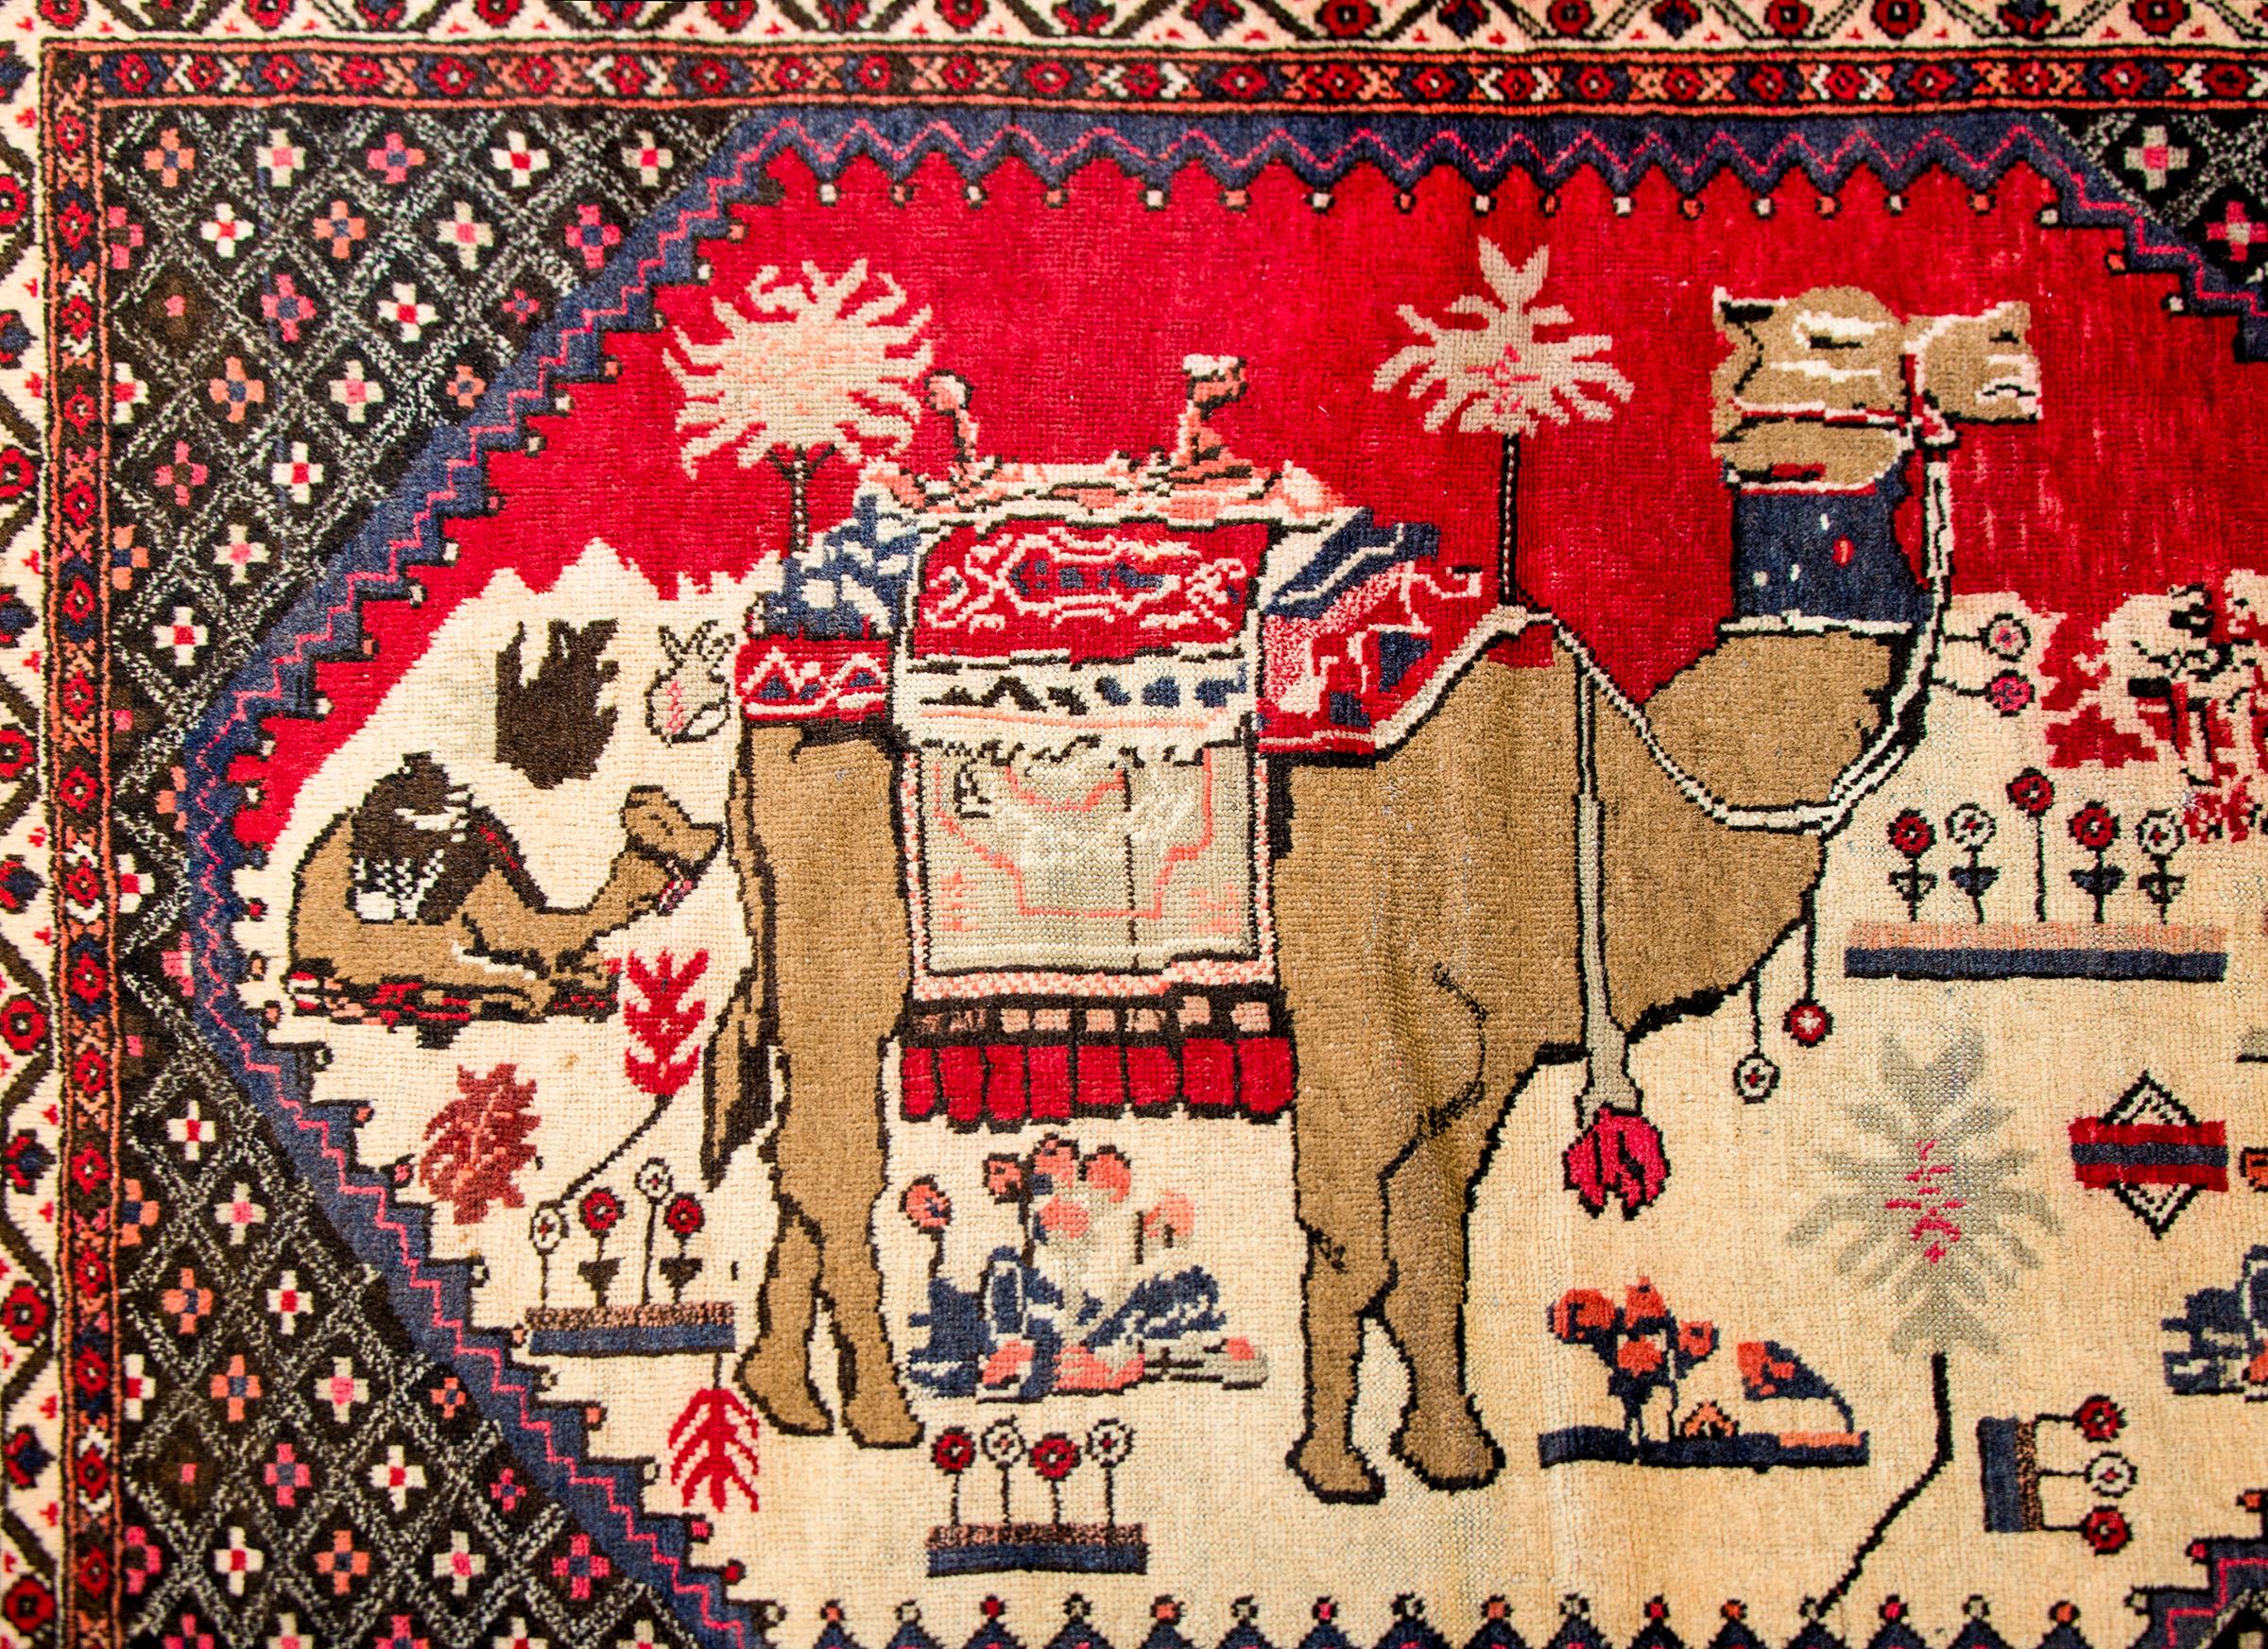 A wonderful vintage pictorial Persian Kelardasht rug with two camels, one kneeling and one standing, amidst a desert landscape with myriad flowering plants and trees. The border is composed with multiple petite flowers, with a complex border